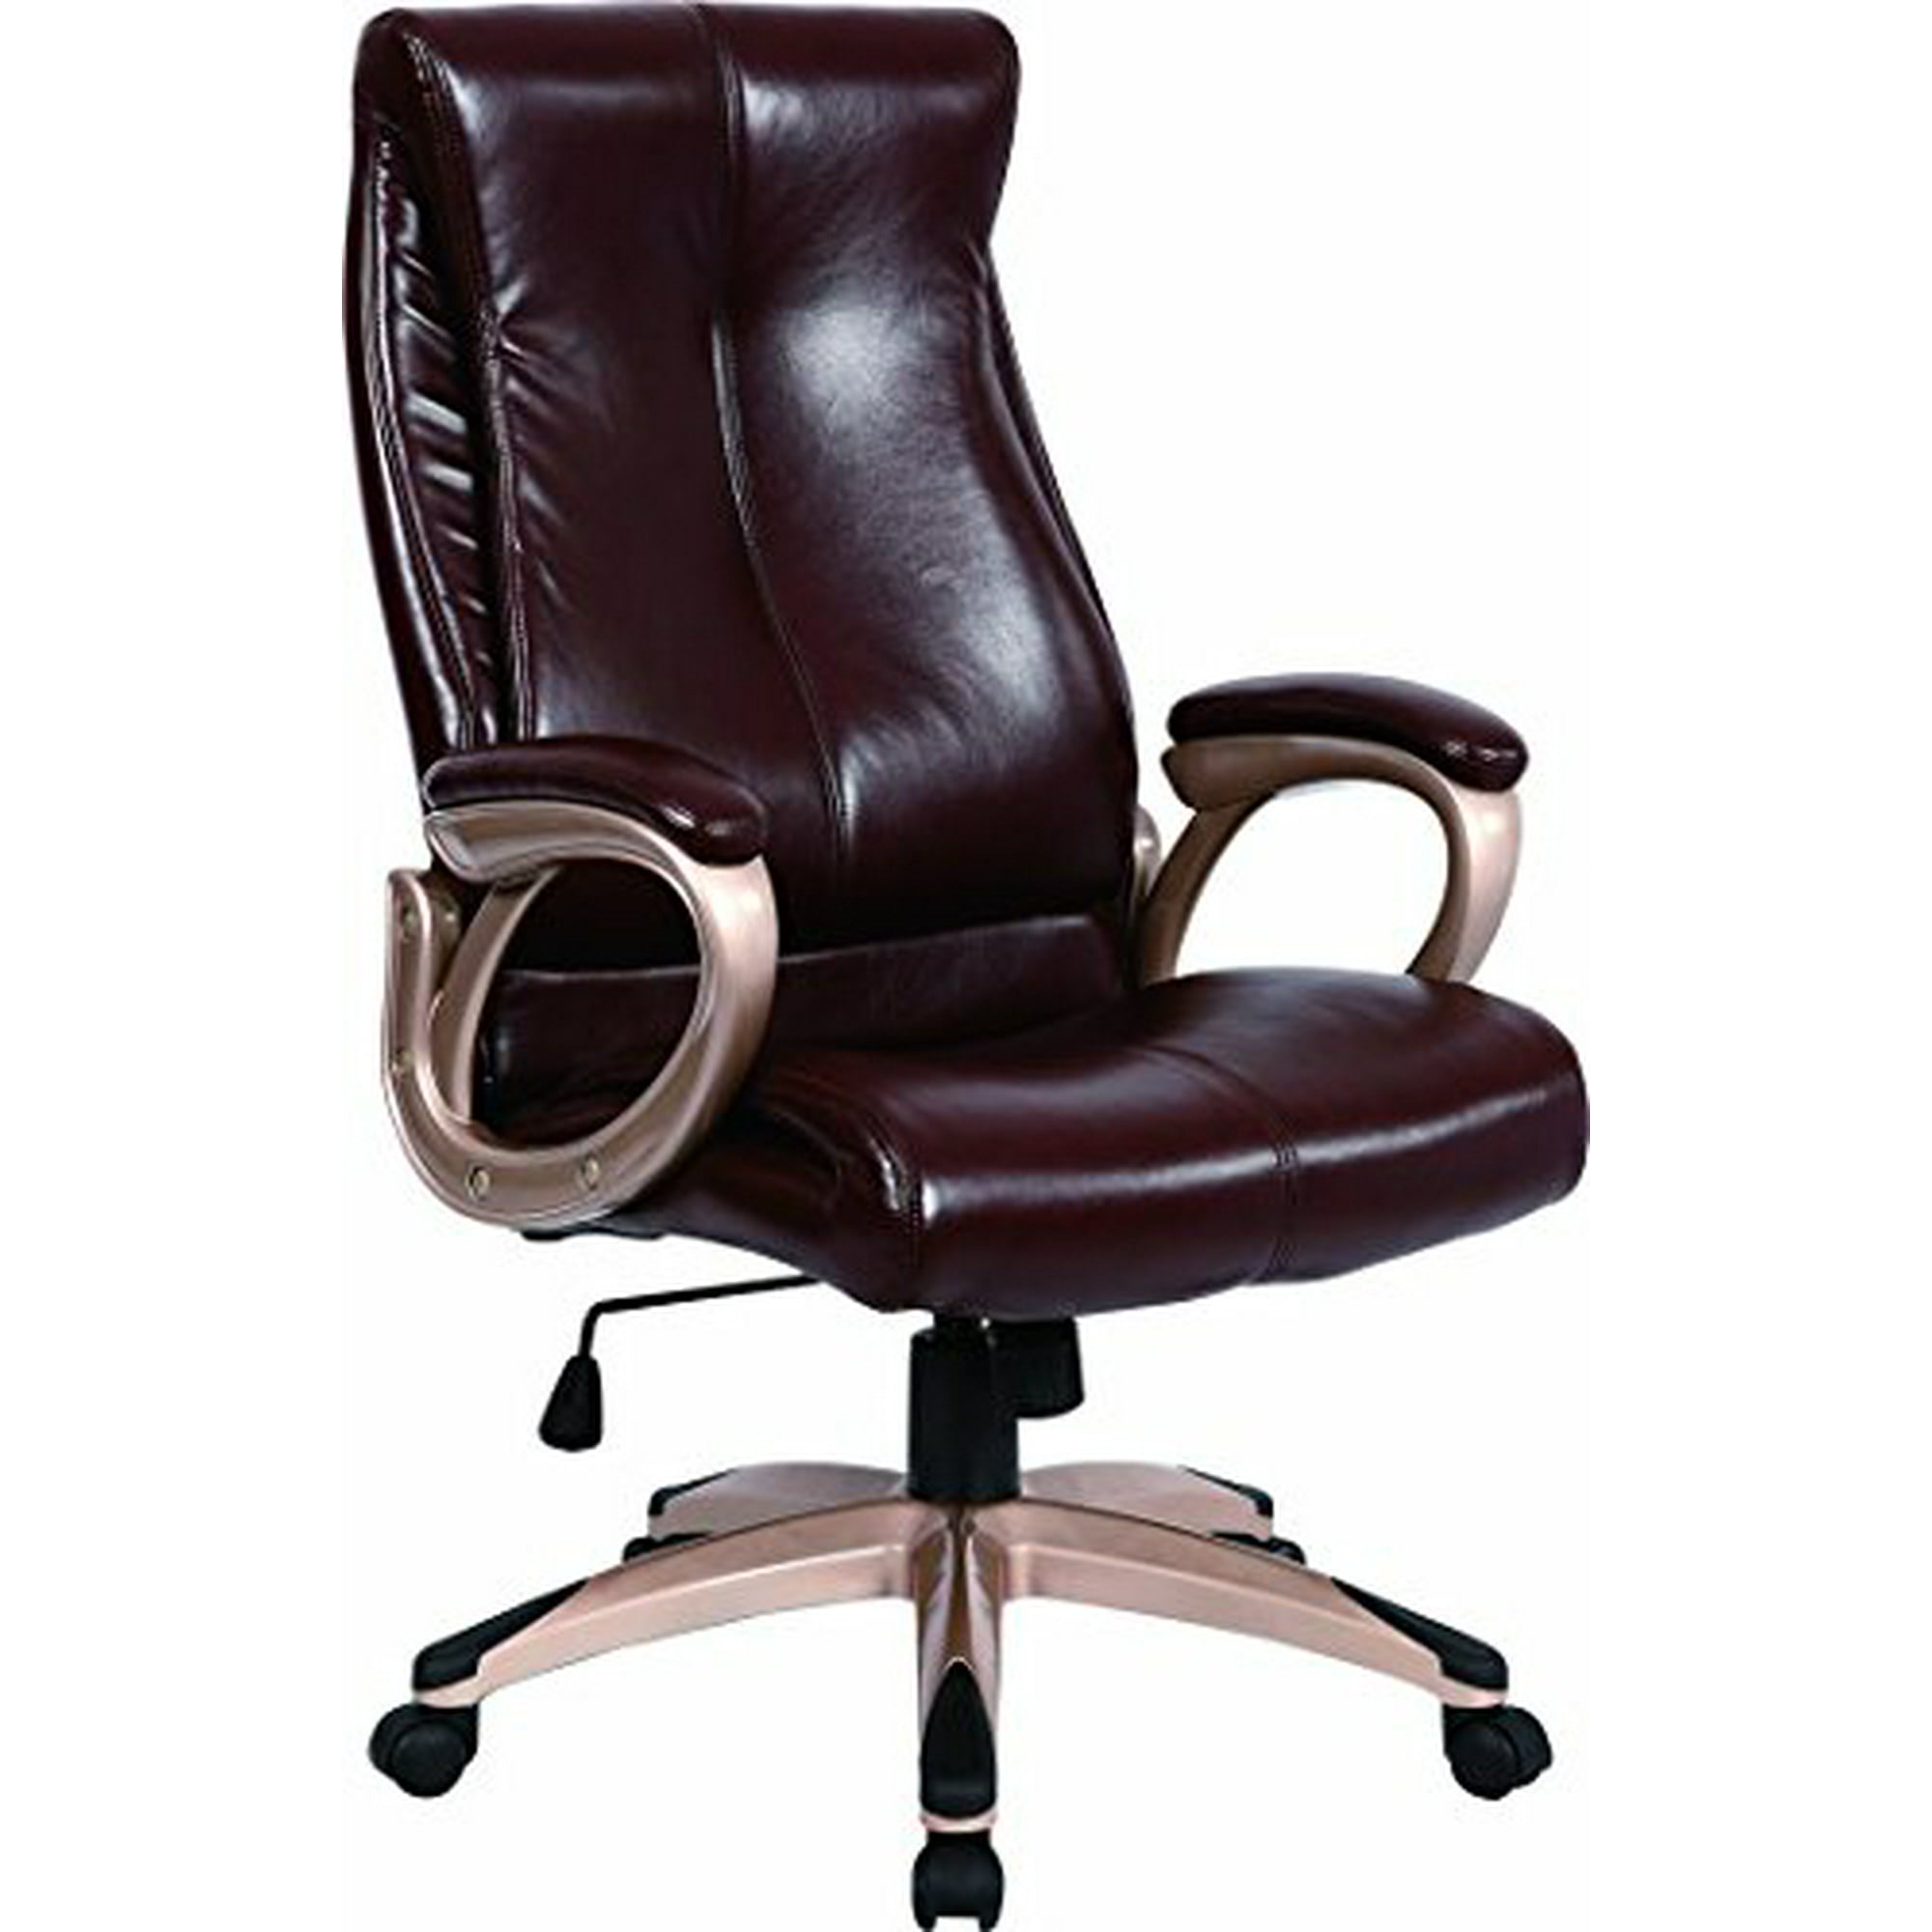 Viscologic Executive High Back Swivel Office Chairs Style 8709